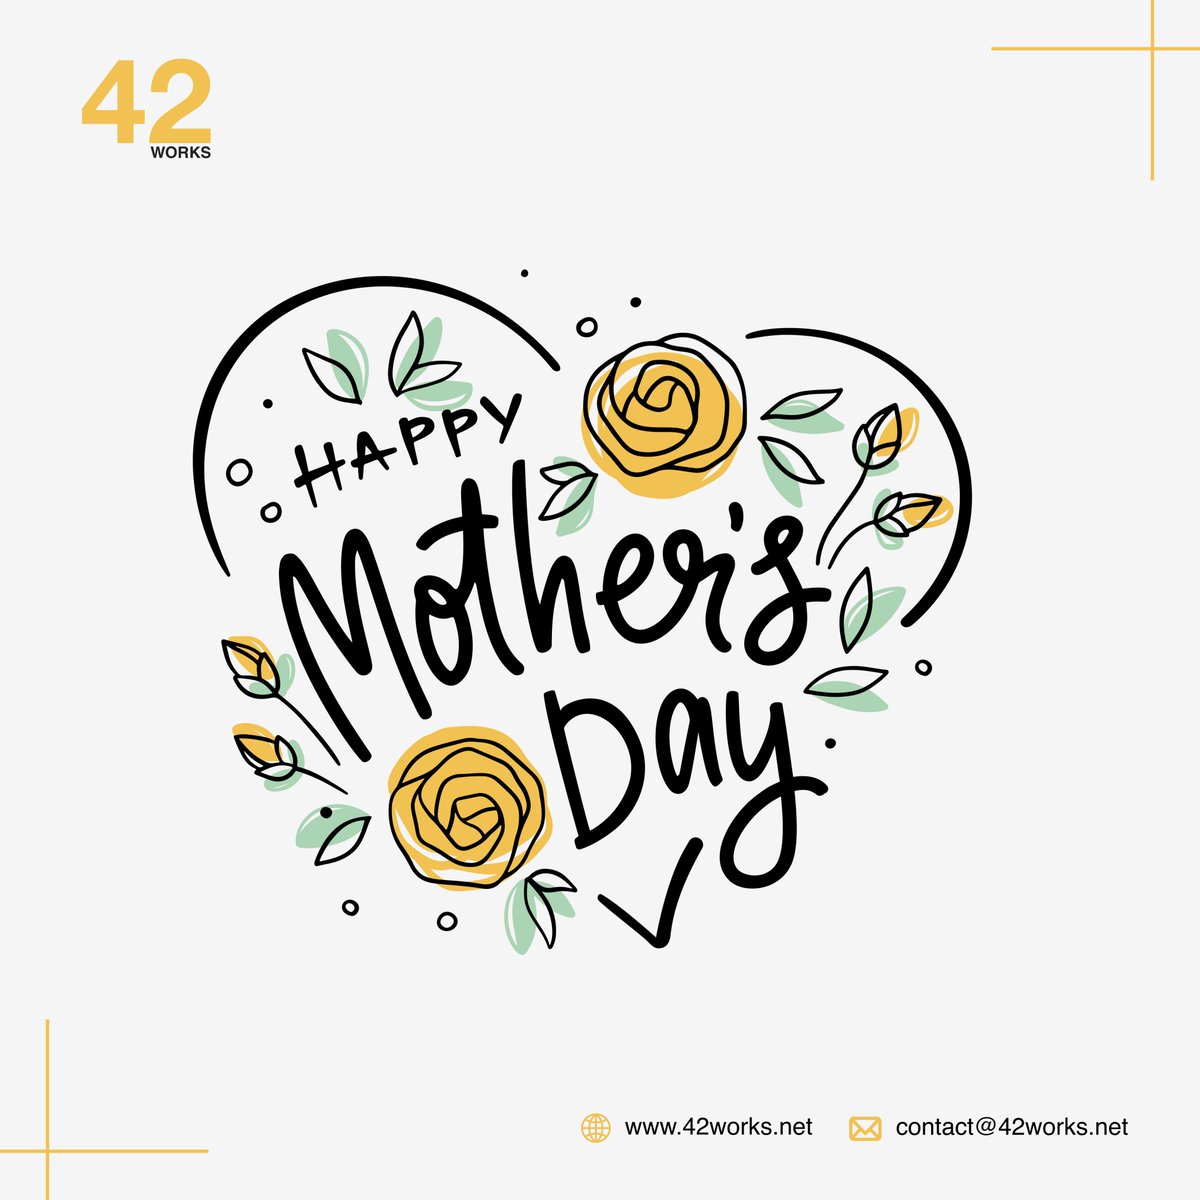 Happy #MothersDay to all the amazing moms out there!  Especially our inspiring #Mompreneurs who run their own businesses!  You juggle it all & amaze us with your strength, dedication, & creativity. We're so grateful! ❤️ #SuperMom #ThankYouMom